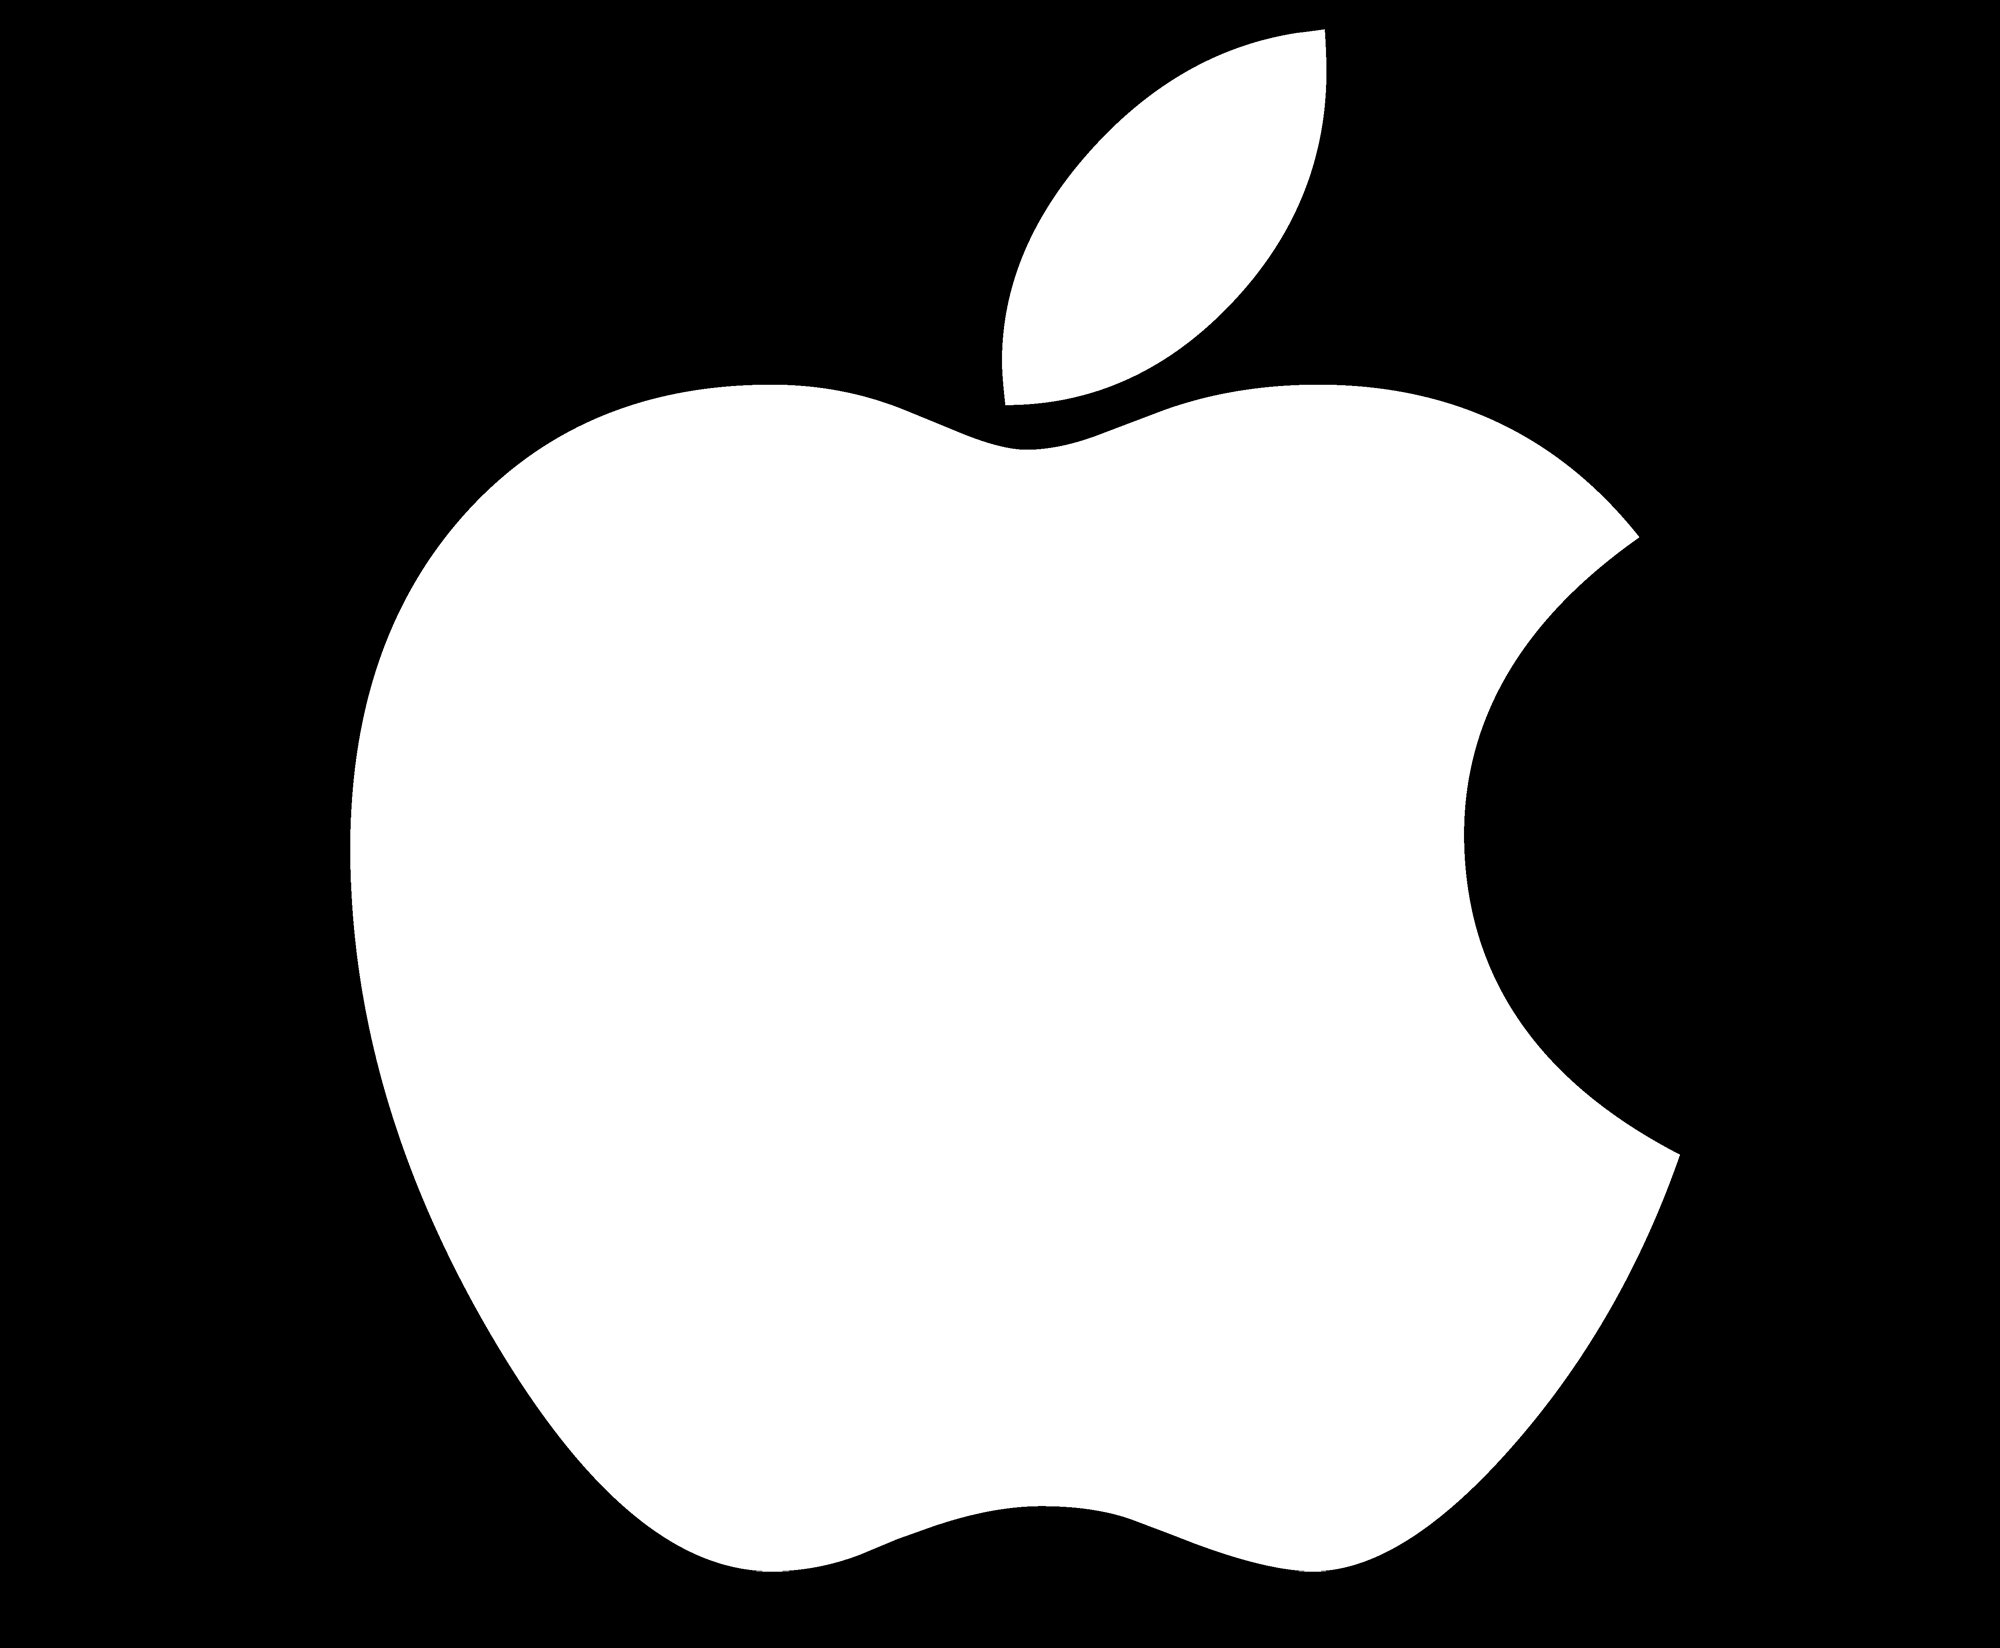 Apple Logo, Apple Symbol Meaning, History and Evolution